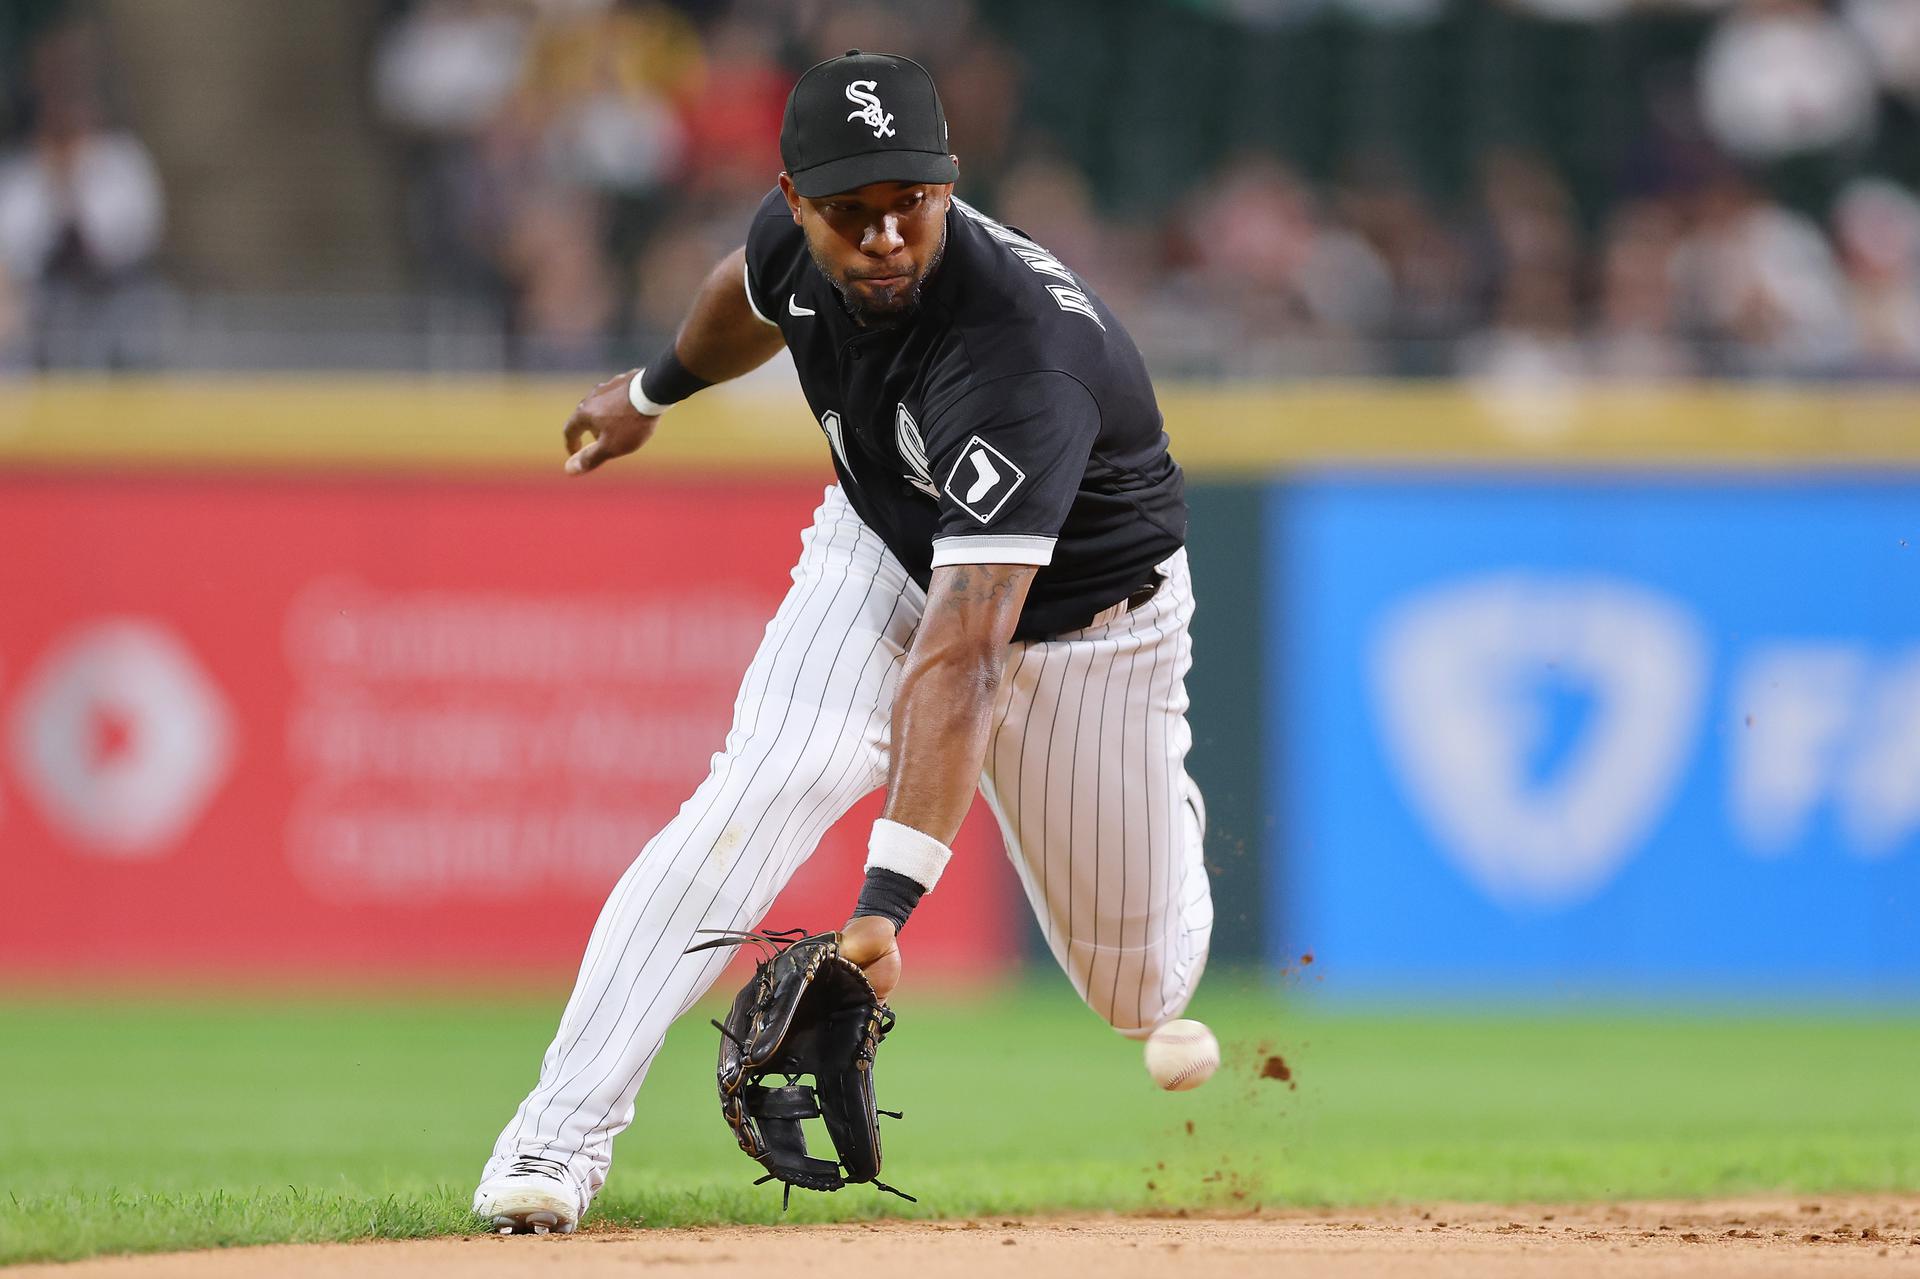 Elvis Andrus fields a ball during a game while wearing a black White Sox jersey